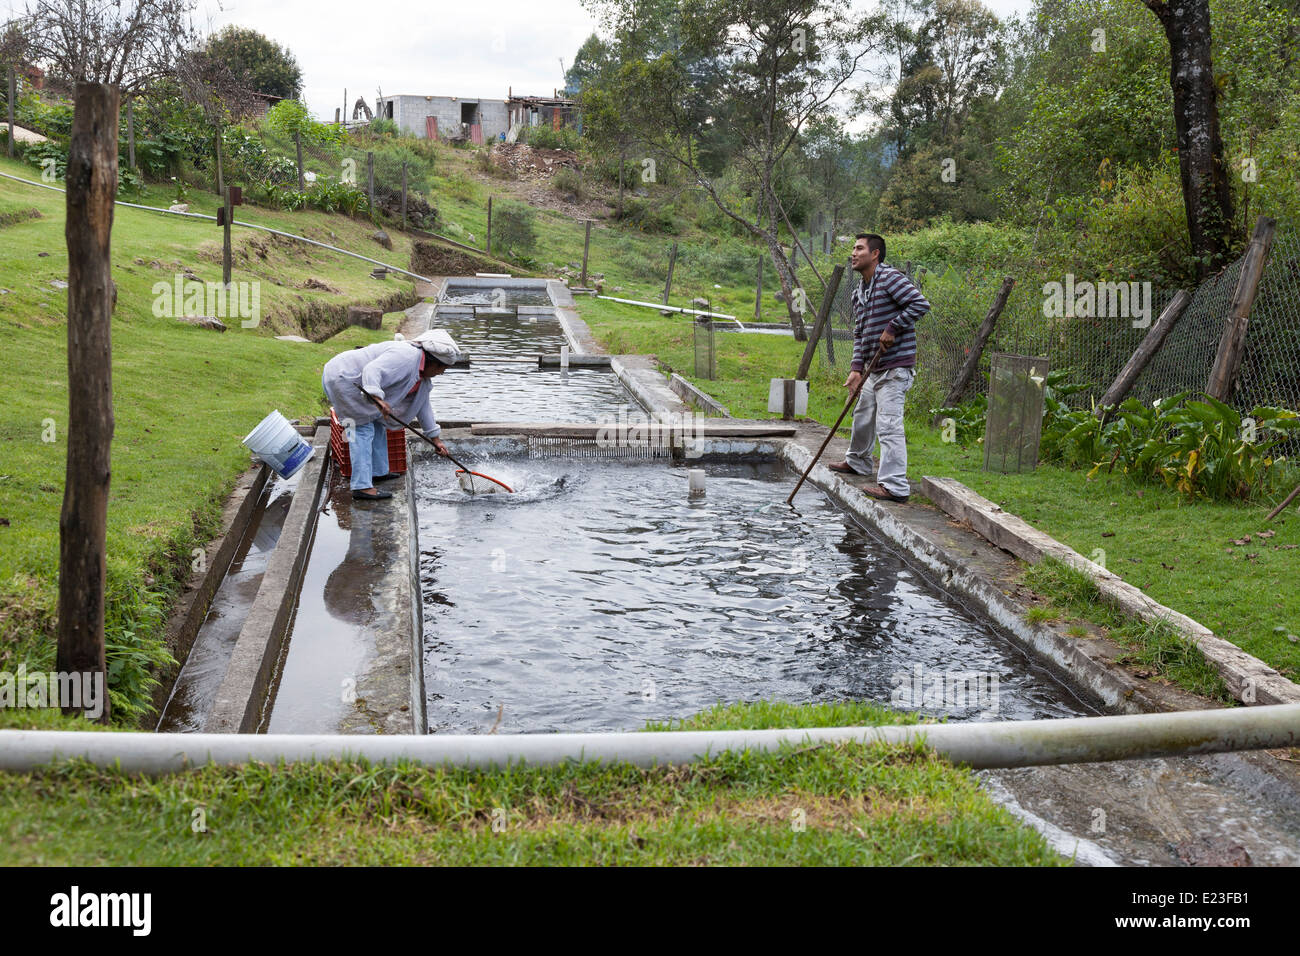 Local farmers catching fish at a trout farm in the village of Macheros - Donato Guerra, State of Mexico, Mexico Stock Photo